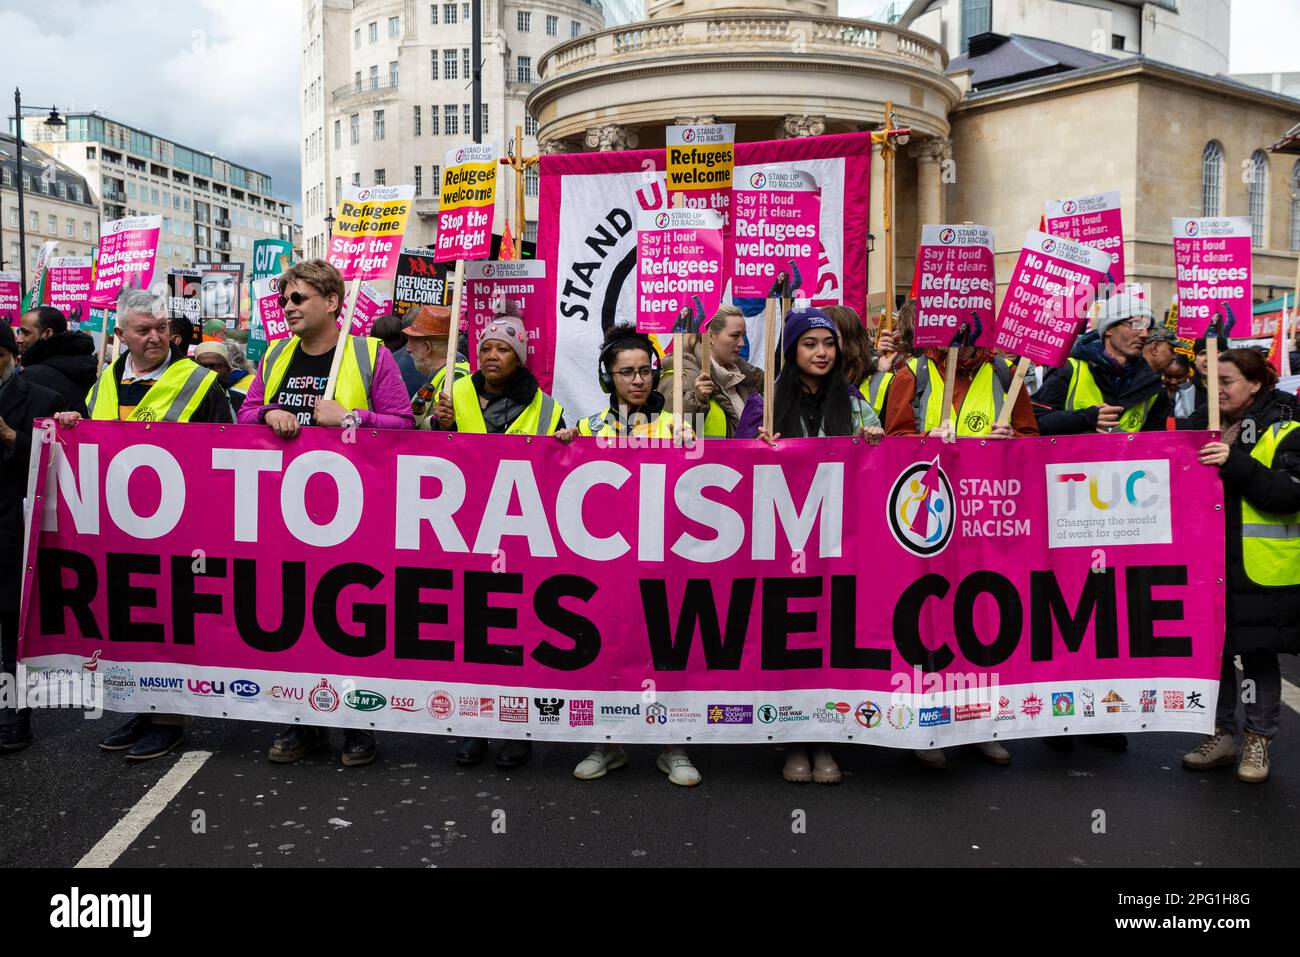 Protest taking place in London on UN Anti Racism Day. Stand up to Racism. No to racism, Refugees welcome banner and protesters Stock Photo